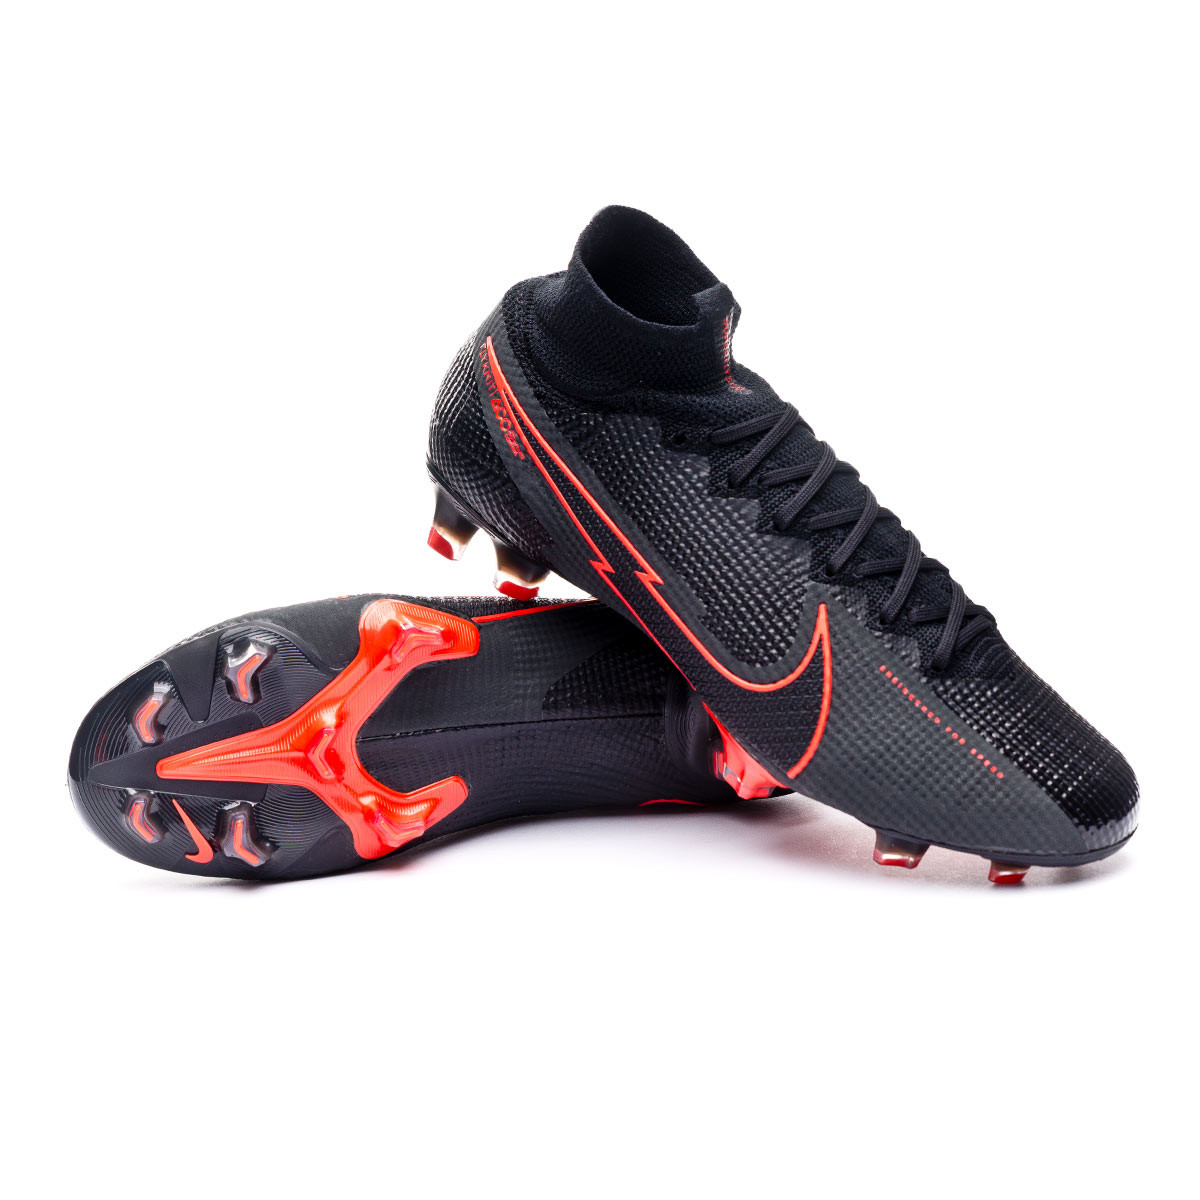 black and red superfly